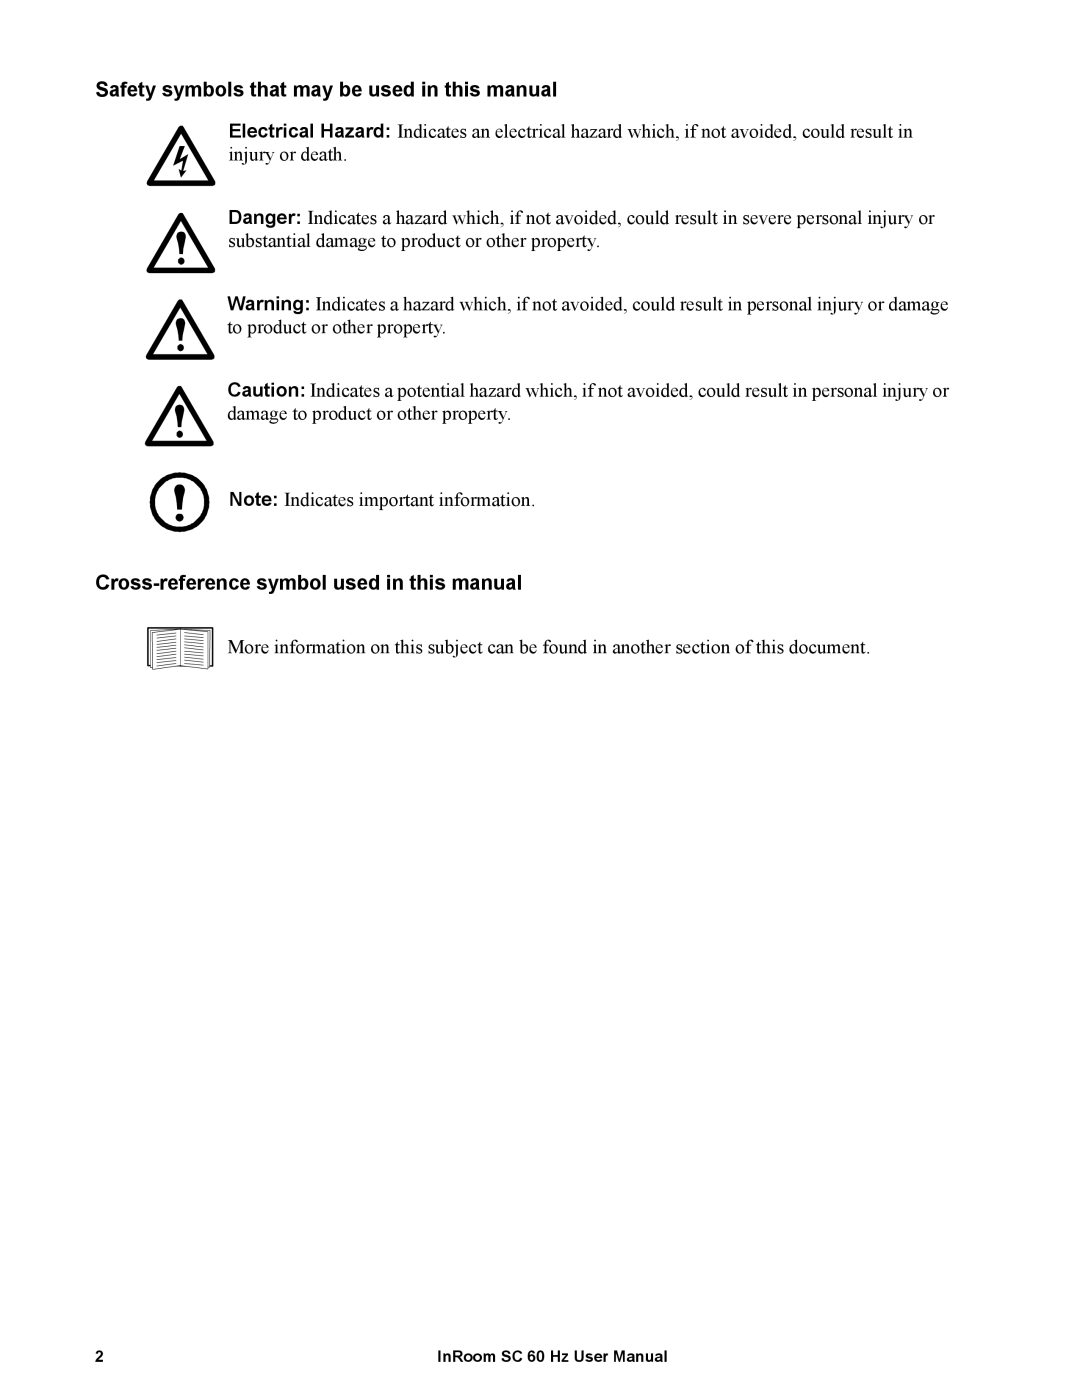 APC ACPSC3500, ACPSC2000 Safety symbols that may be used in this manual, Cross-referencesymbol used in this manual 